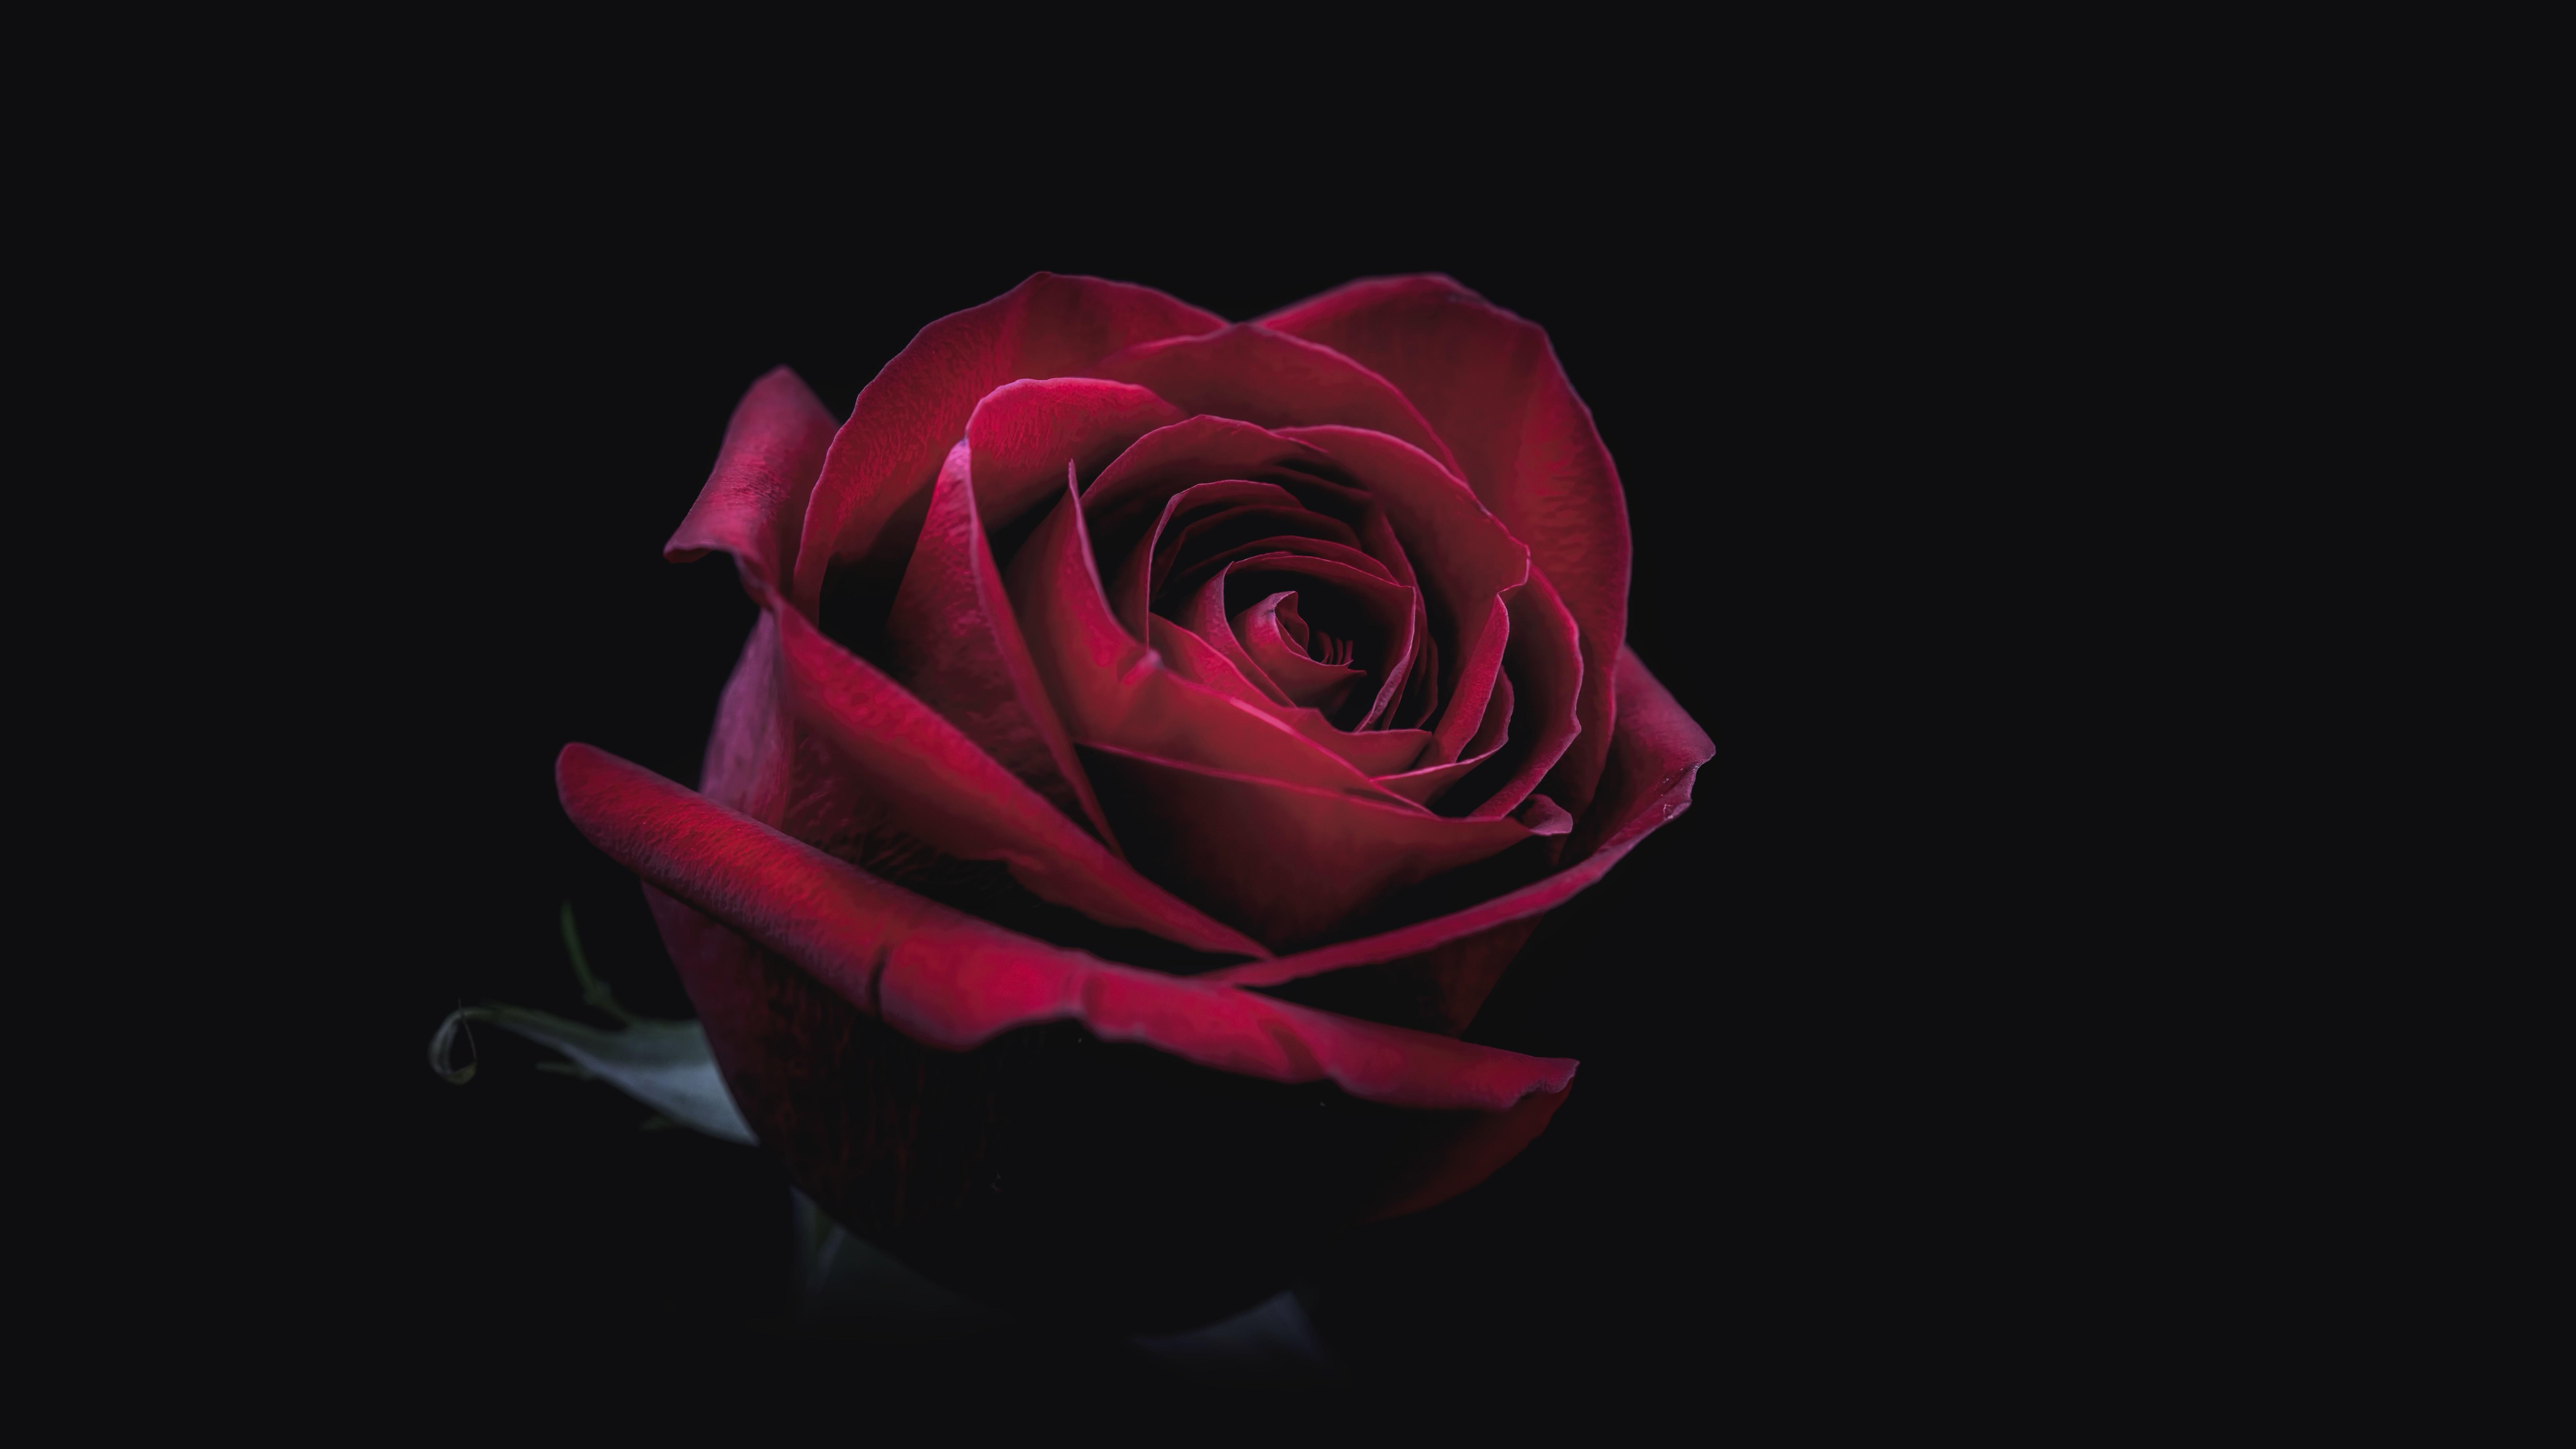 Rose Oled 8k 8k HD 4k Wallpaper, Image, Background, Photo and Picture